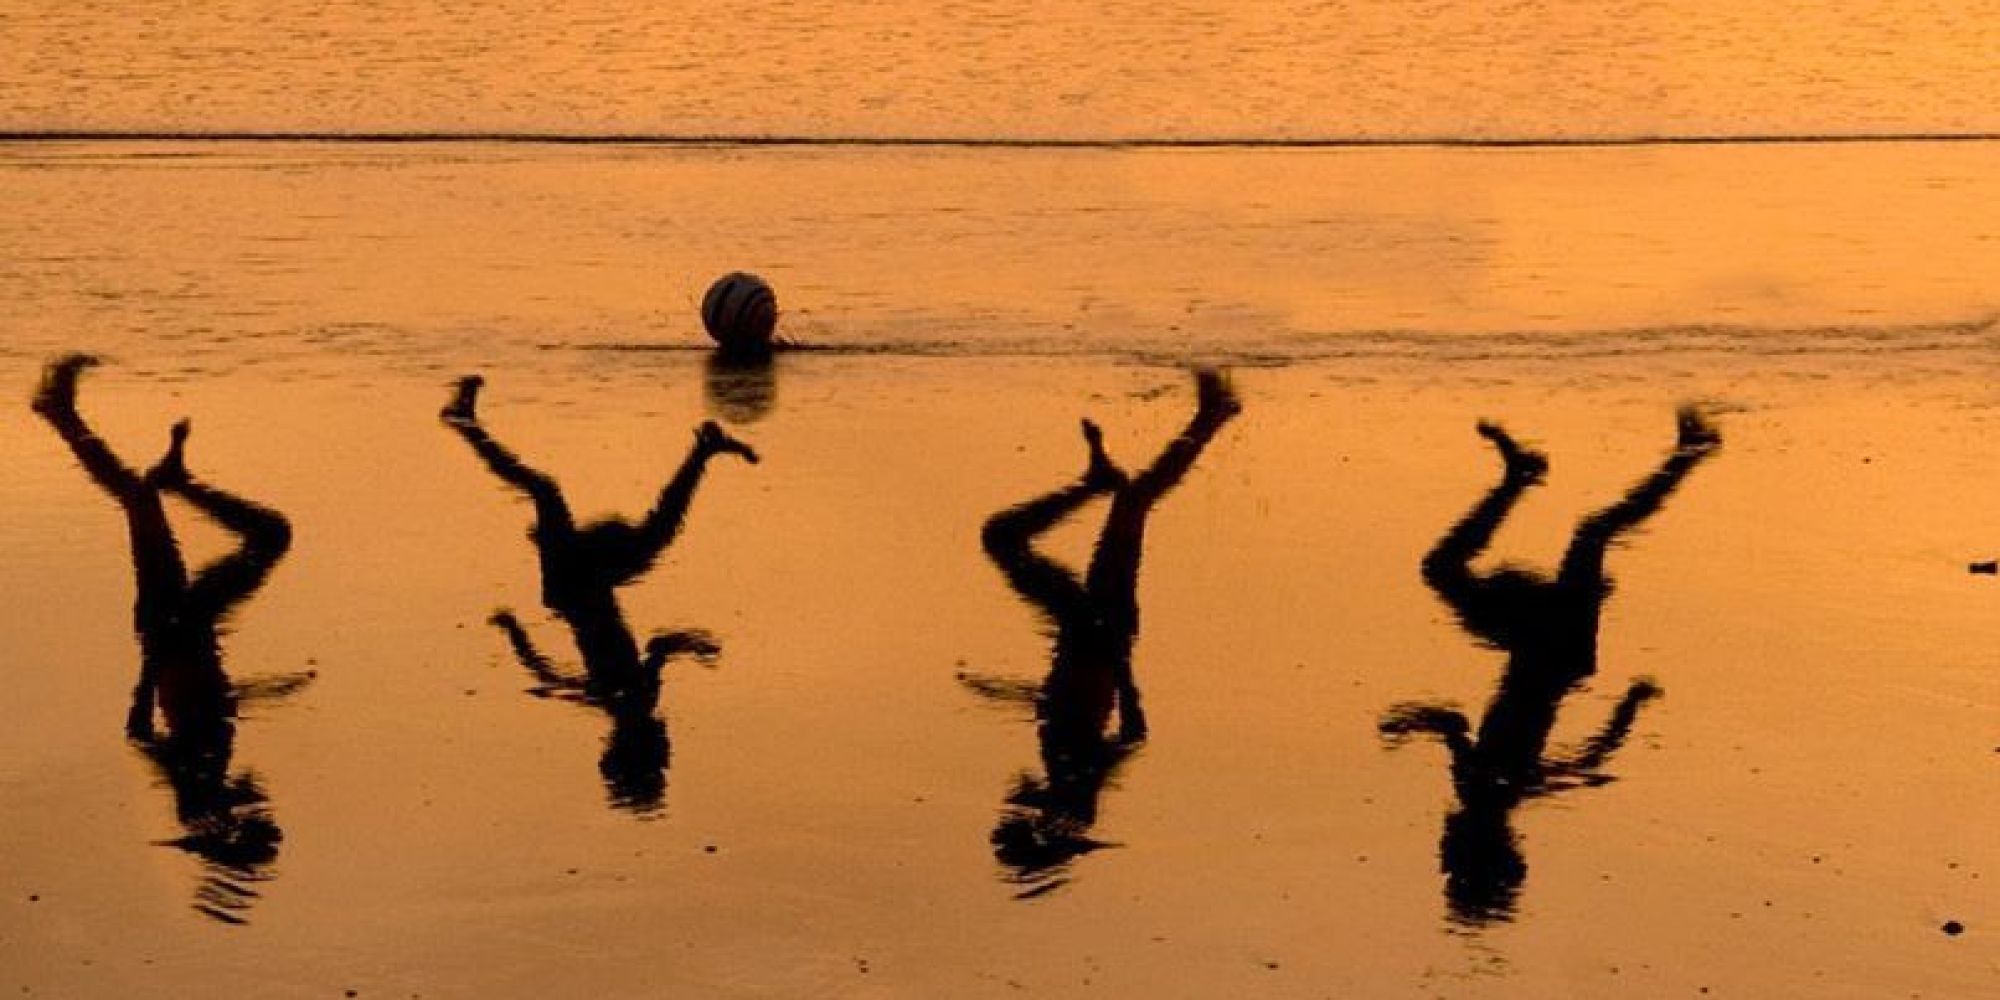 A tribute by Israeli artist Amir Schiby to the 4 children killed on a Gaza beach by an Israeli air strike while playing football